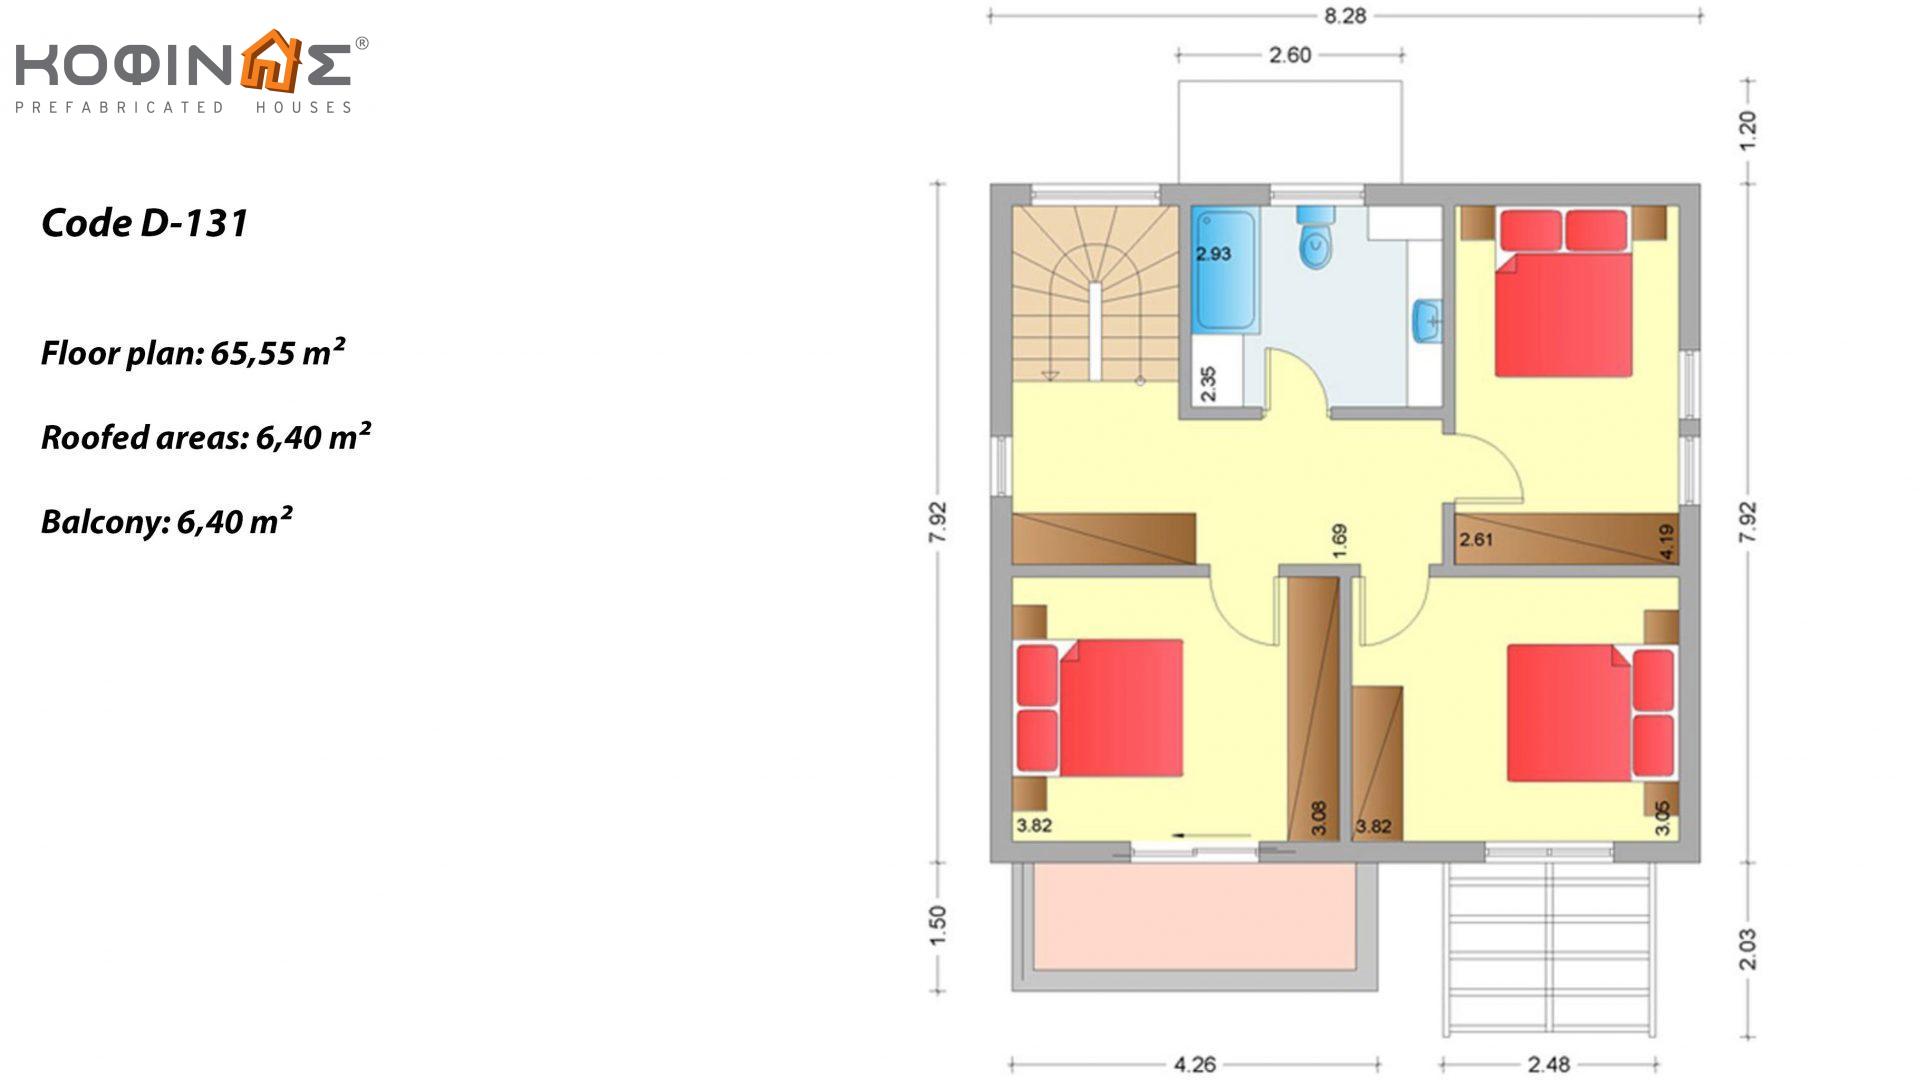 2-story house D-131, total surface of 131,10 m²,covered roofed areas 20.94 m²,balconies 6.40 m²